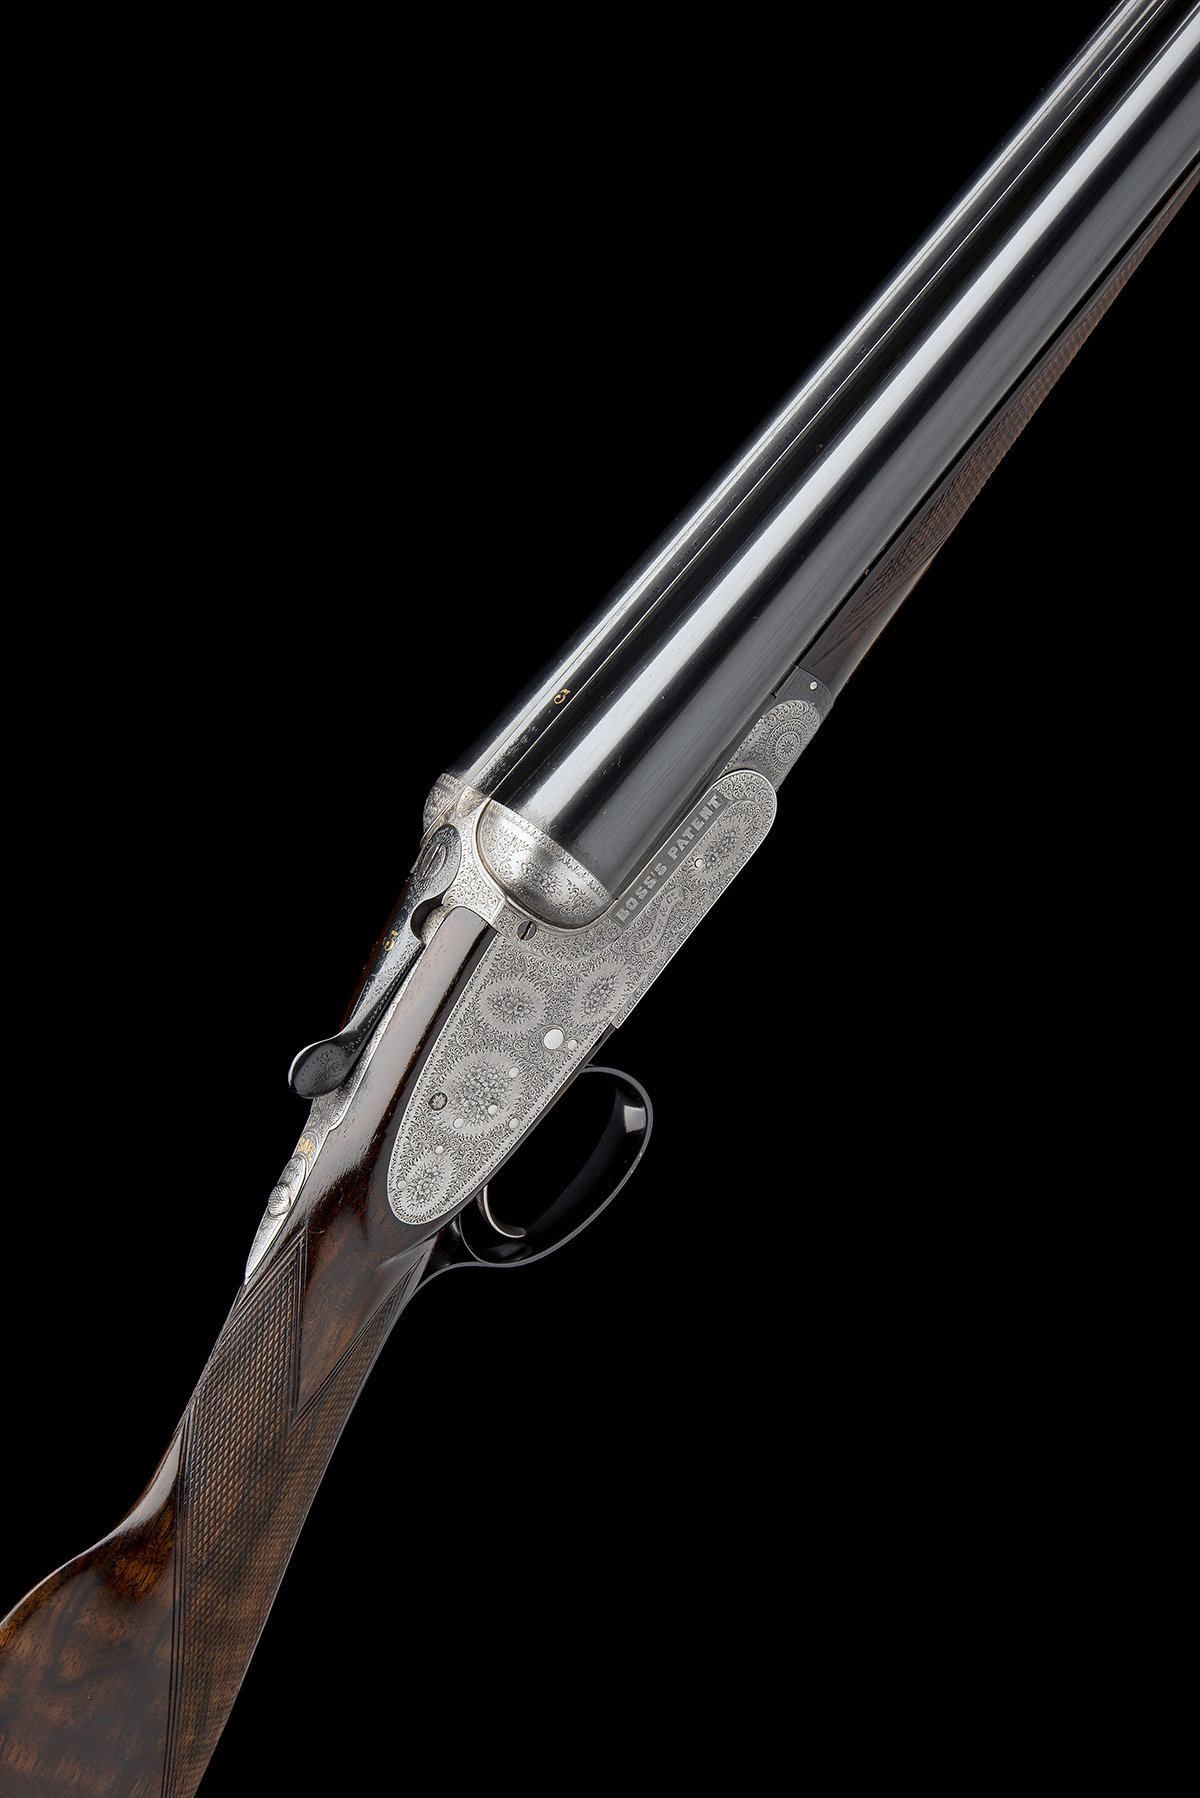 BOSS & CO. A 12-BORE SINGLE-TRIGGER EASY-OPENING SIDELOCK EJECTOR, serial no. 4593, for 1898,